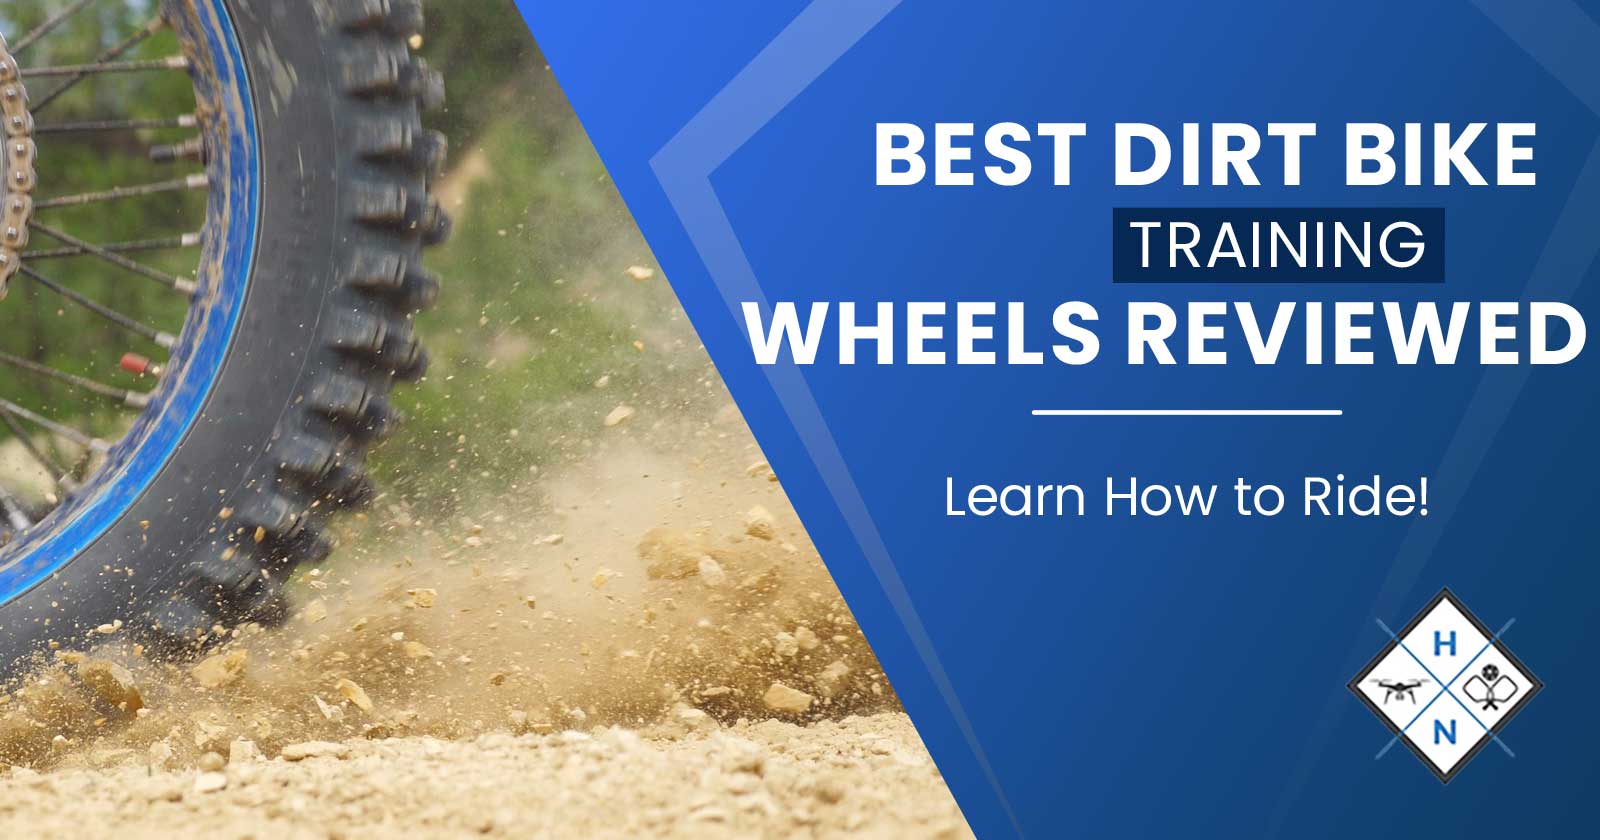 Best Dirt Bike Training Wheels Reviewed – Learn How to Ride!